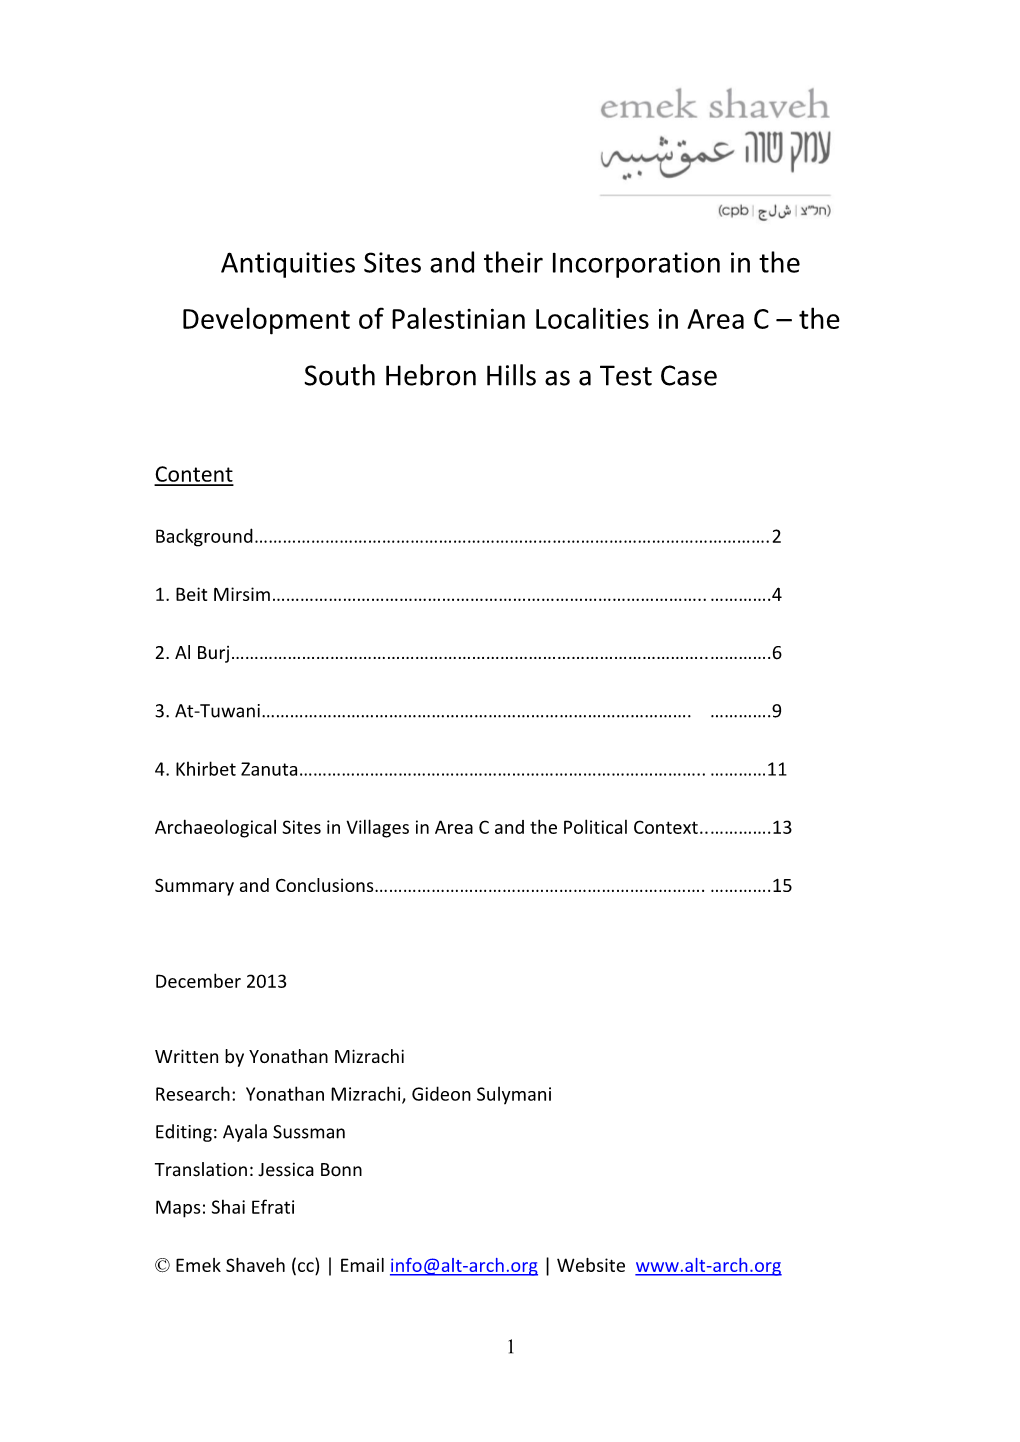 Antiquities Sites and Their Incorporation in the Development of Palestinian Localities in Area C – the South Hebron Hills As a Test Case